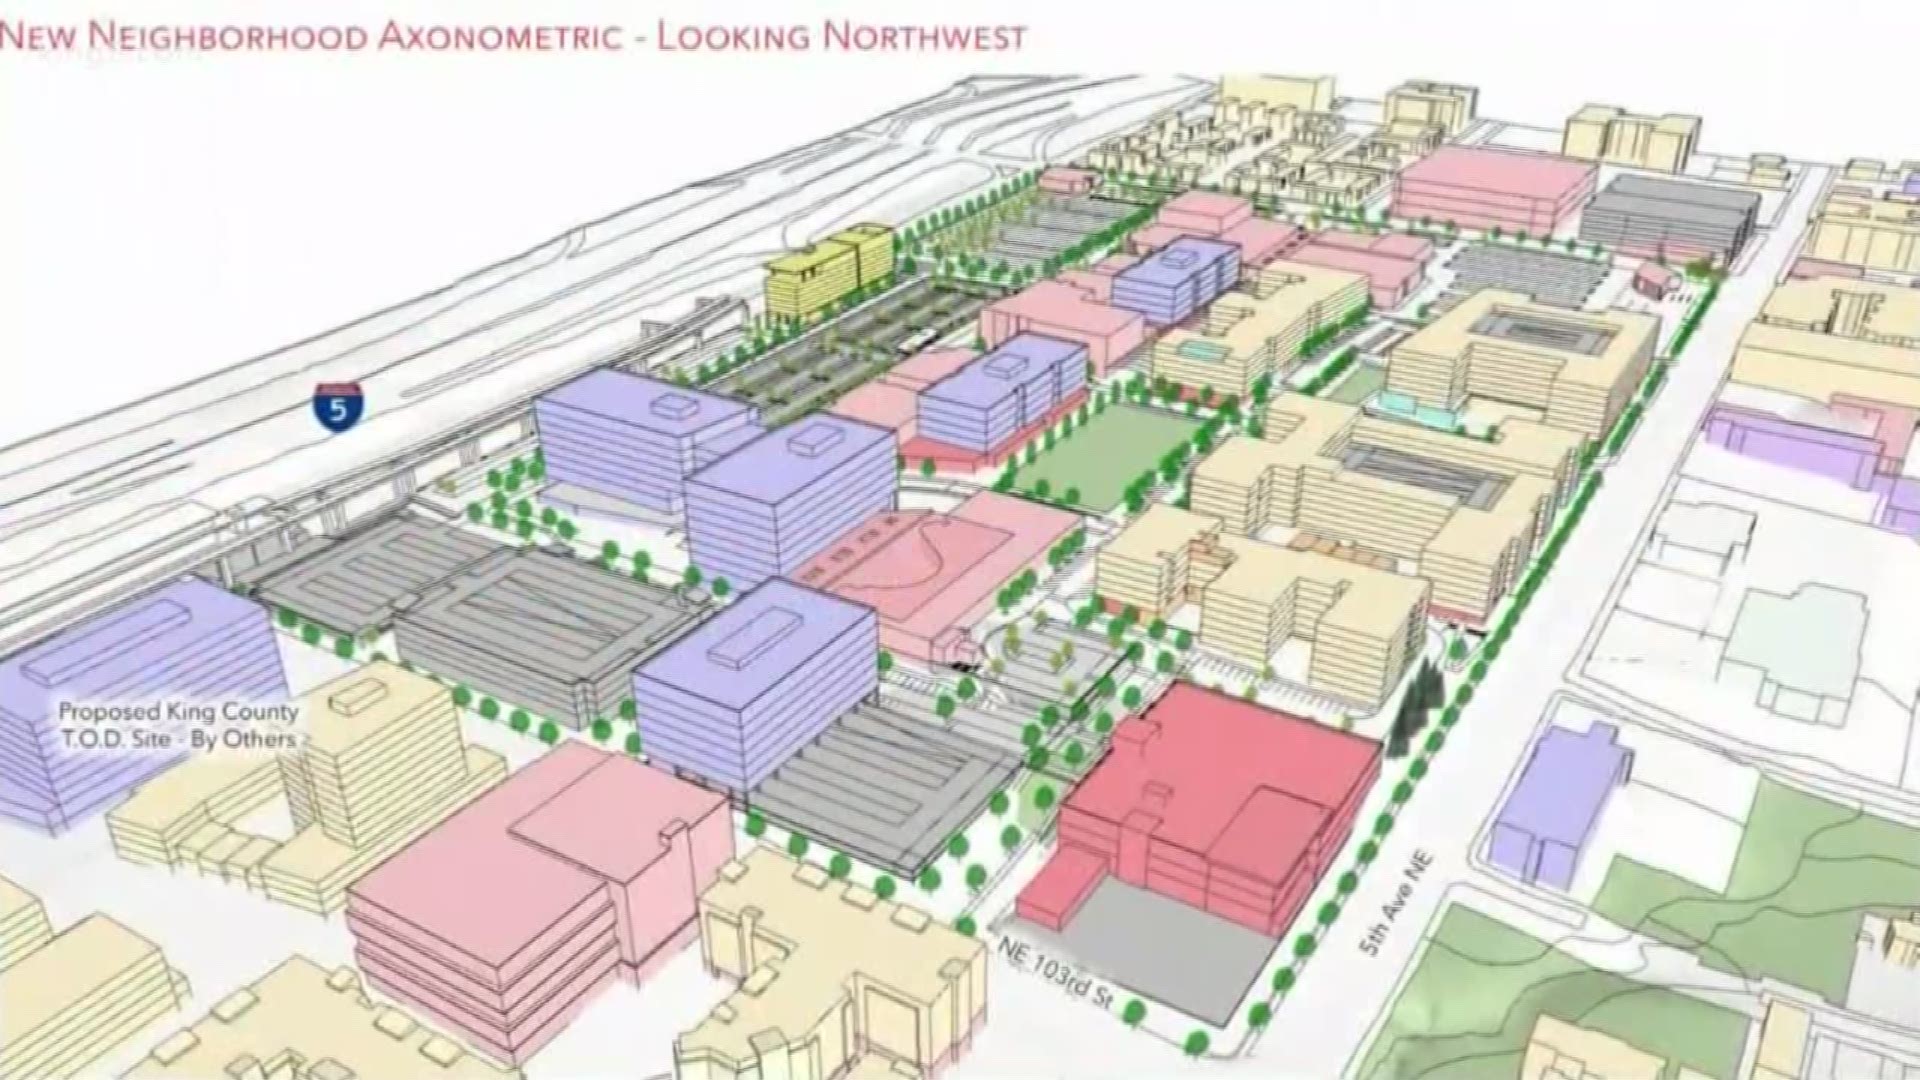 Northgate Mall Developers Plan Radical Redesign